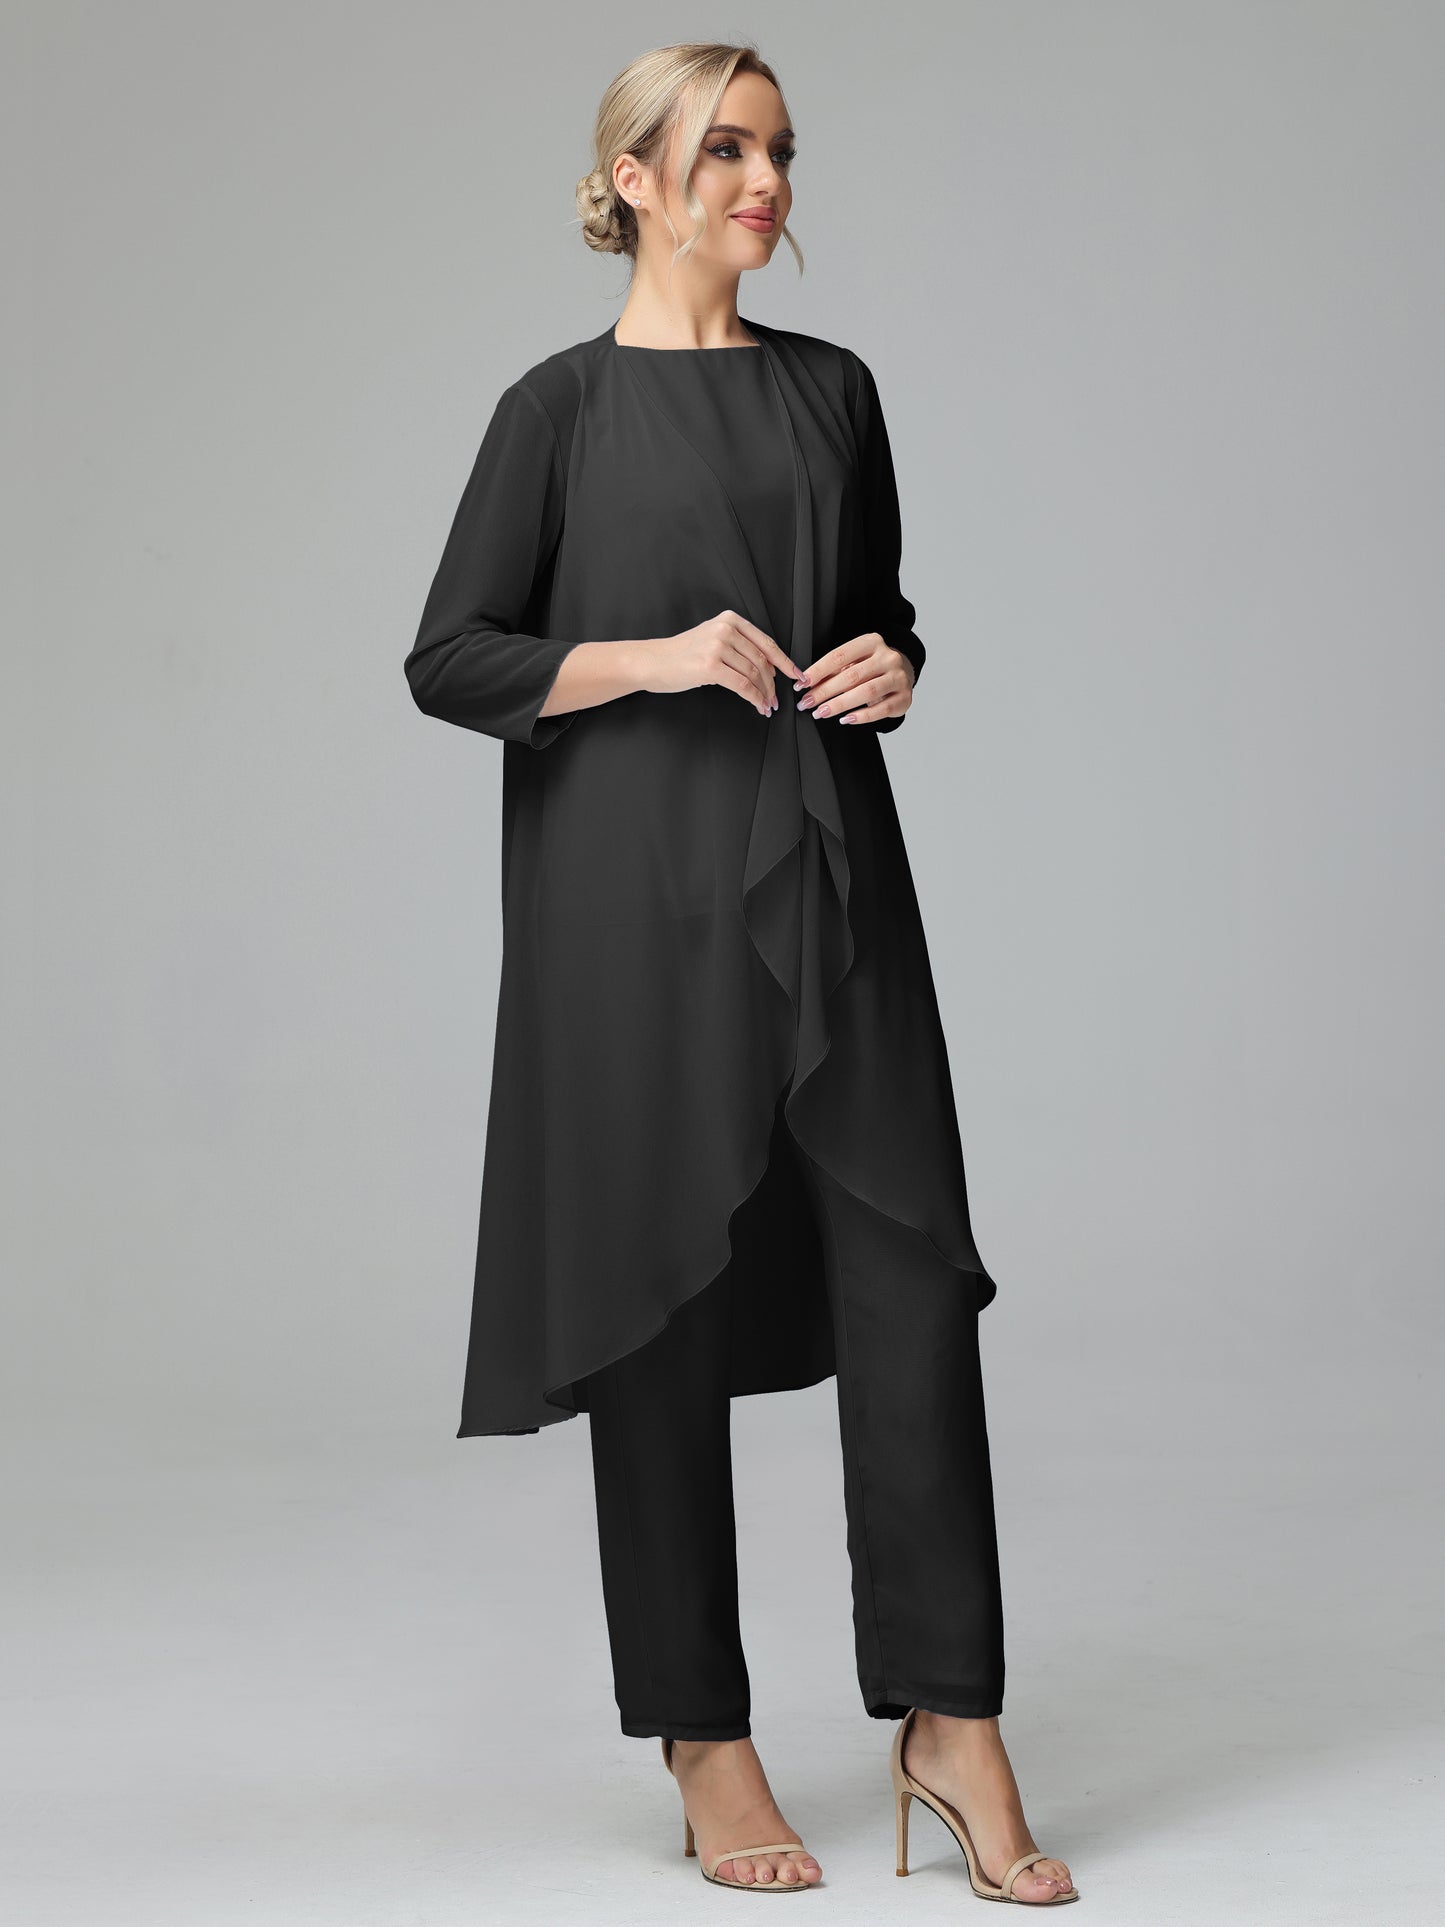 Simple Chiffon 3 Pieces Mother of the Bride Dress Pant Suits